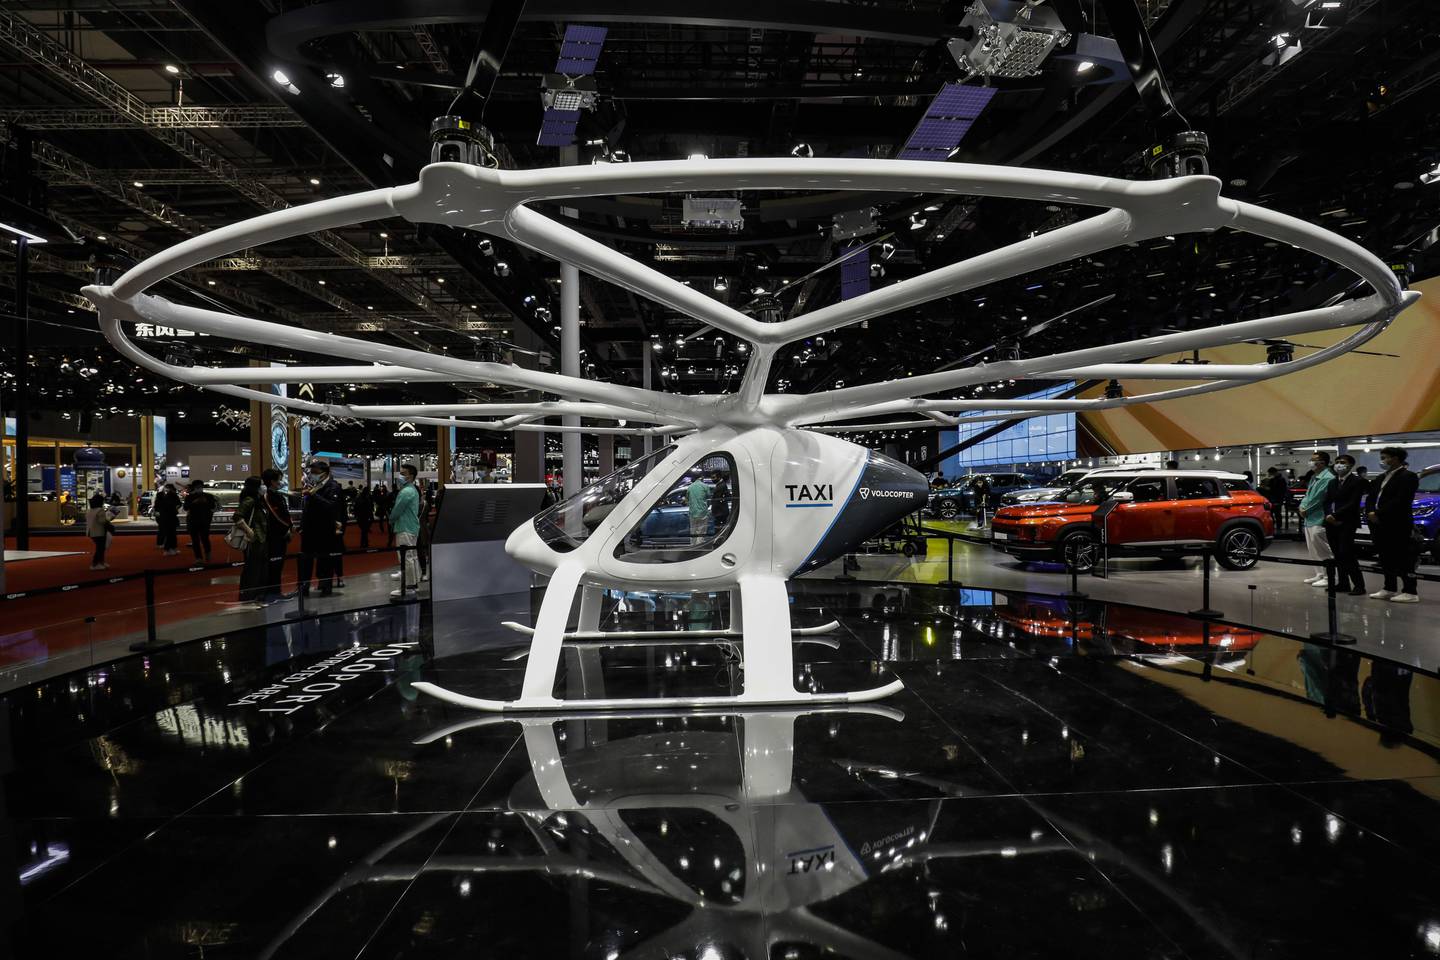 The Volocopter GmbH 2X electric air taxi, manufactured between Volocopter and Geely Technology Group Co., at the Auto Shanghai 2021 show in Shanghai, China, on Tuesday, April 20, 2021.